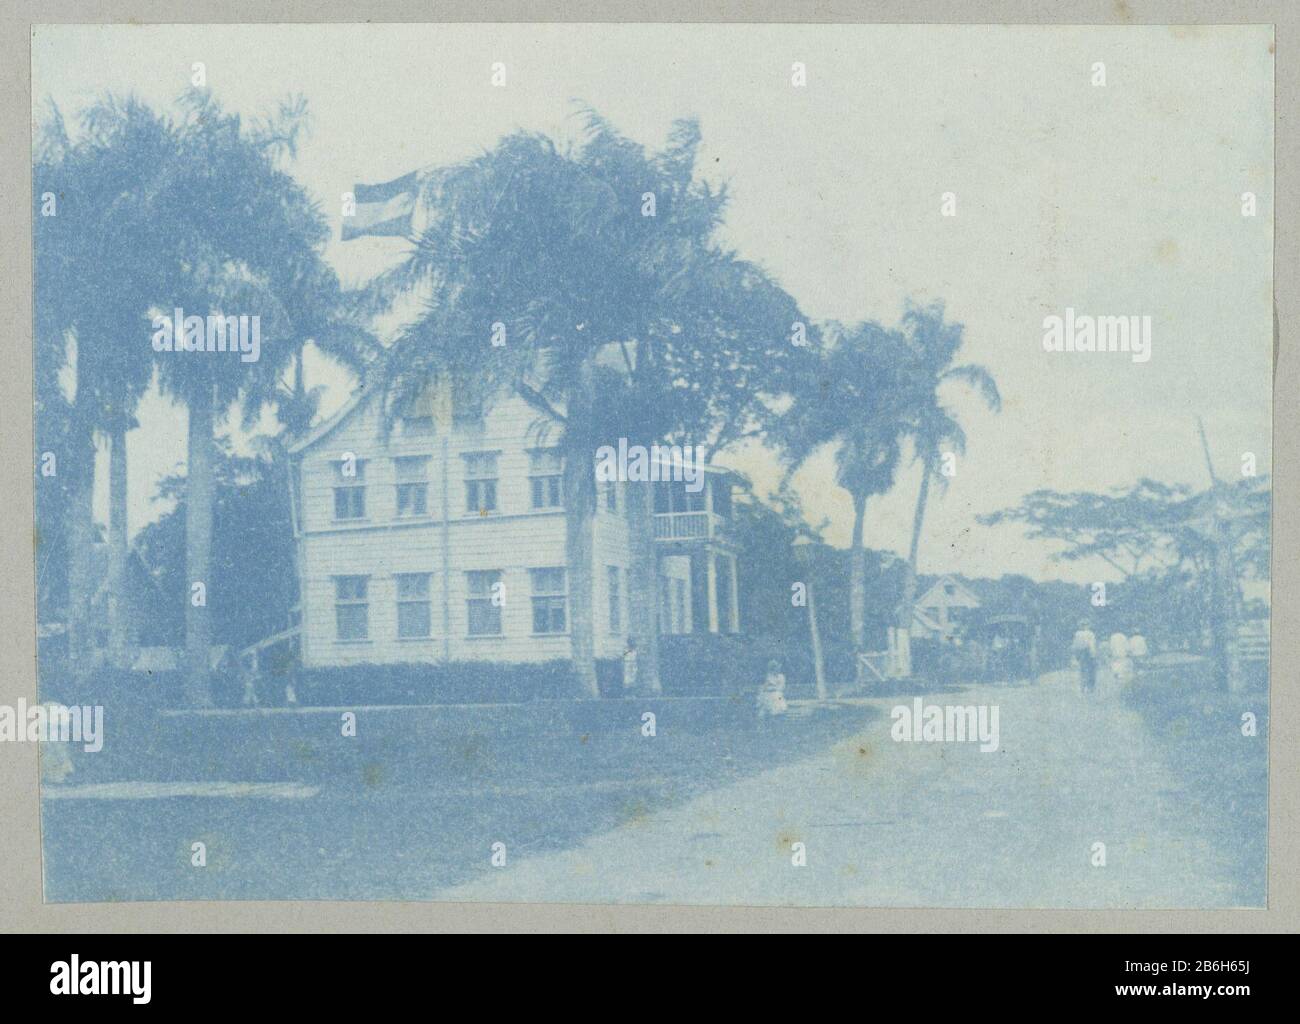 Building commissioner in Combé in Paramaribo. Part of the album Souvenir de Voyage (Part 1), about the life of the Doijer family in and around the plantation Ma Retraite in Suriname during the years 1906-1913. Manufacturer : Photographer: Hendrik Doijer (attributed to) Place manufacture: Suriname Date: 1906 - 1913 Physical features: cyanotypie Material: paper Technique: cyanotypie Dimensions: photo: h 78 mm × W 109 mm Date: 1906 - 1913 Stock Photo